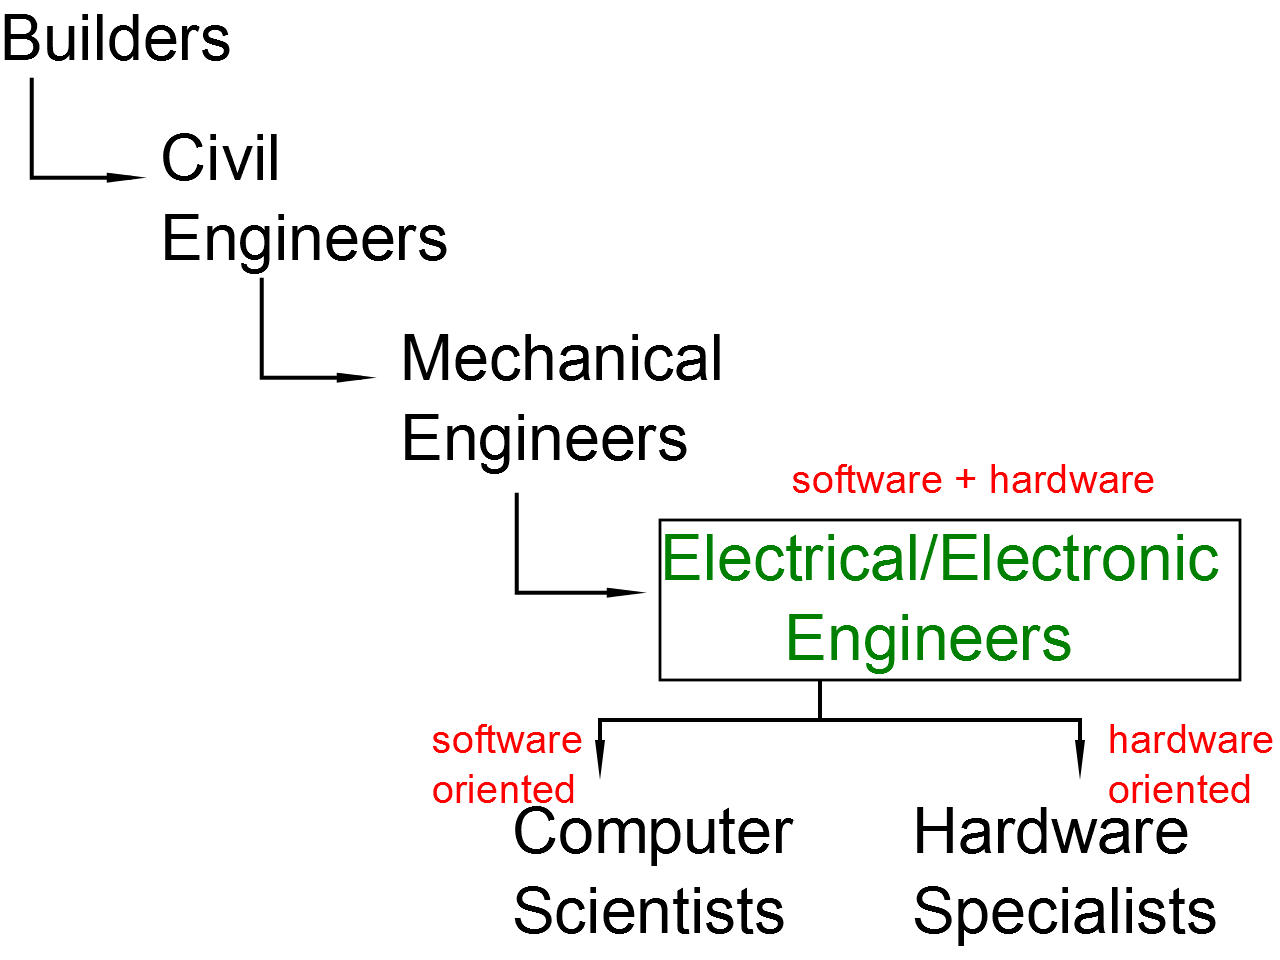 Basic Engineering Development Hieararchy.png